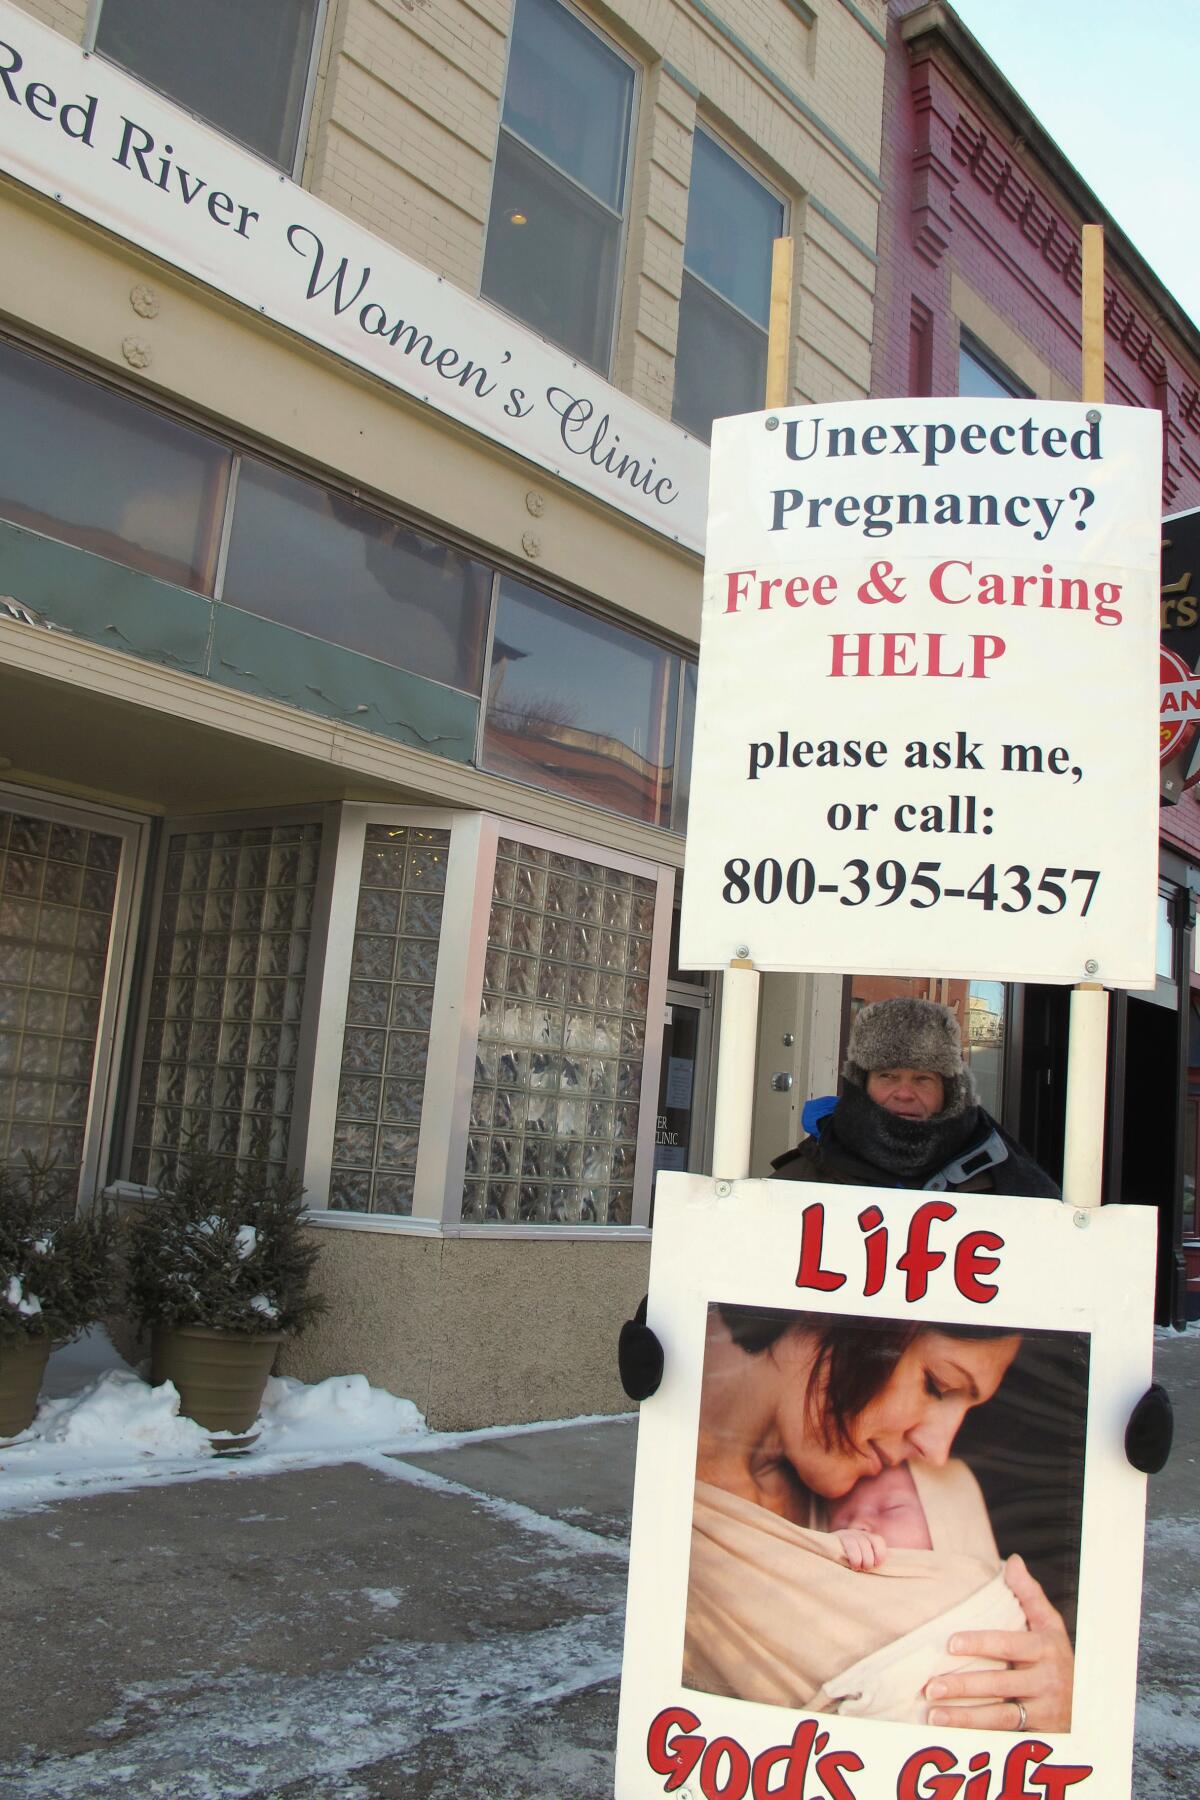 FILE - An abortion protester stands outside the Red River Valley Women's Clinic in Fargo, N.D., on Feb. 20, 2013. North Dakota's only abortion clinic, the Red River Women's Clinic, has gone to federal court seeking to declare the state's imminent abortion ban is contrary to the state constitution. (AP Photo/Dave Kolpack, File)